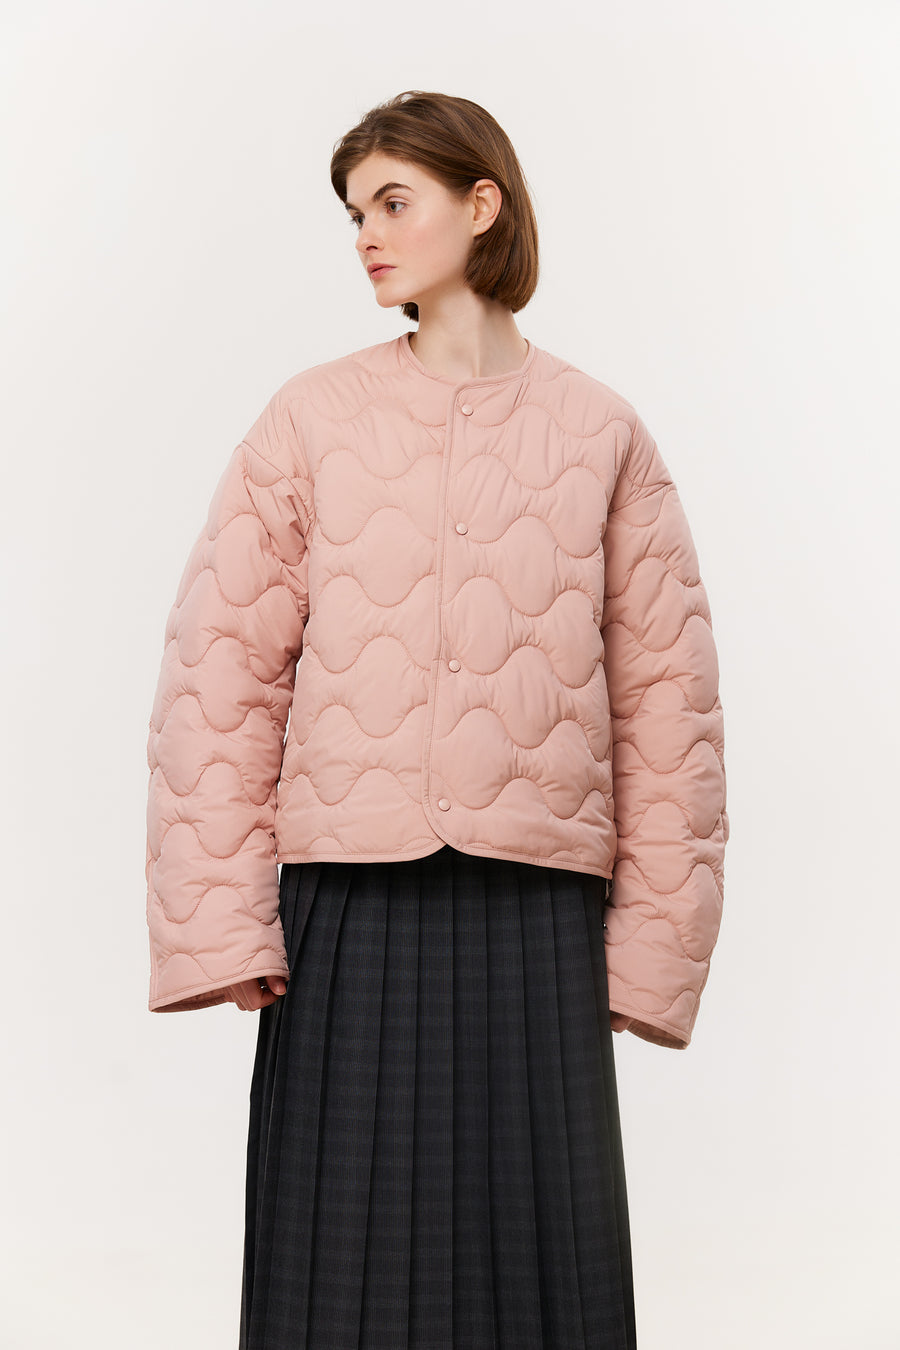 Quilted Liner Jacket in powder